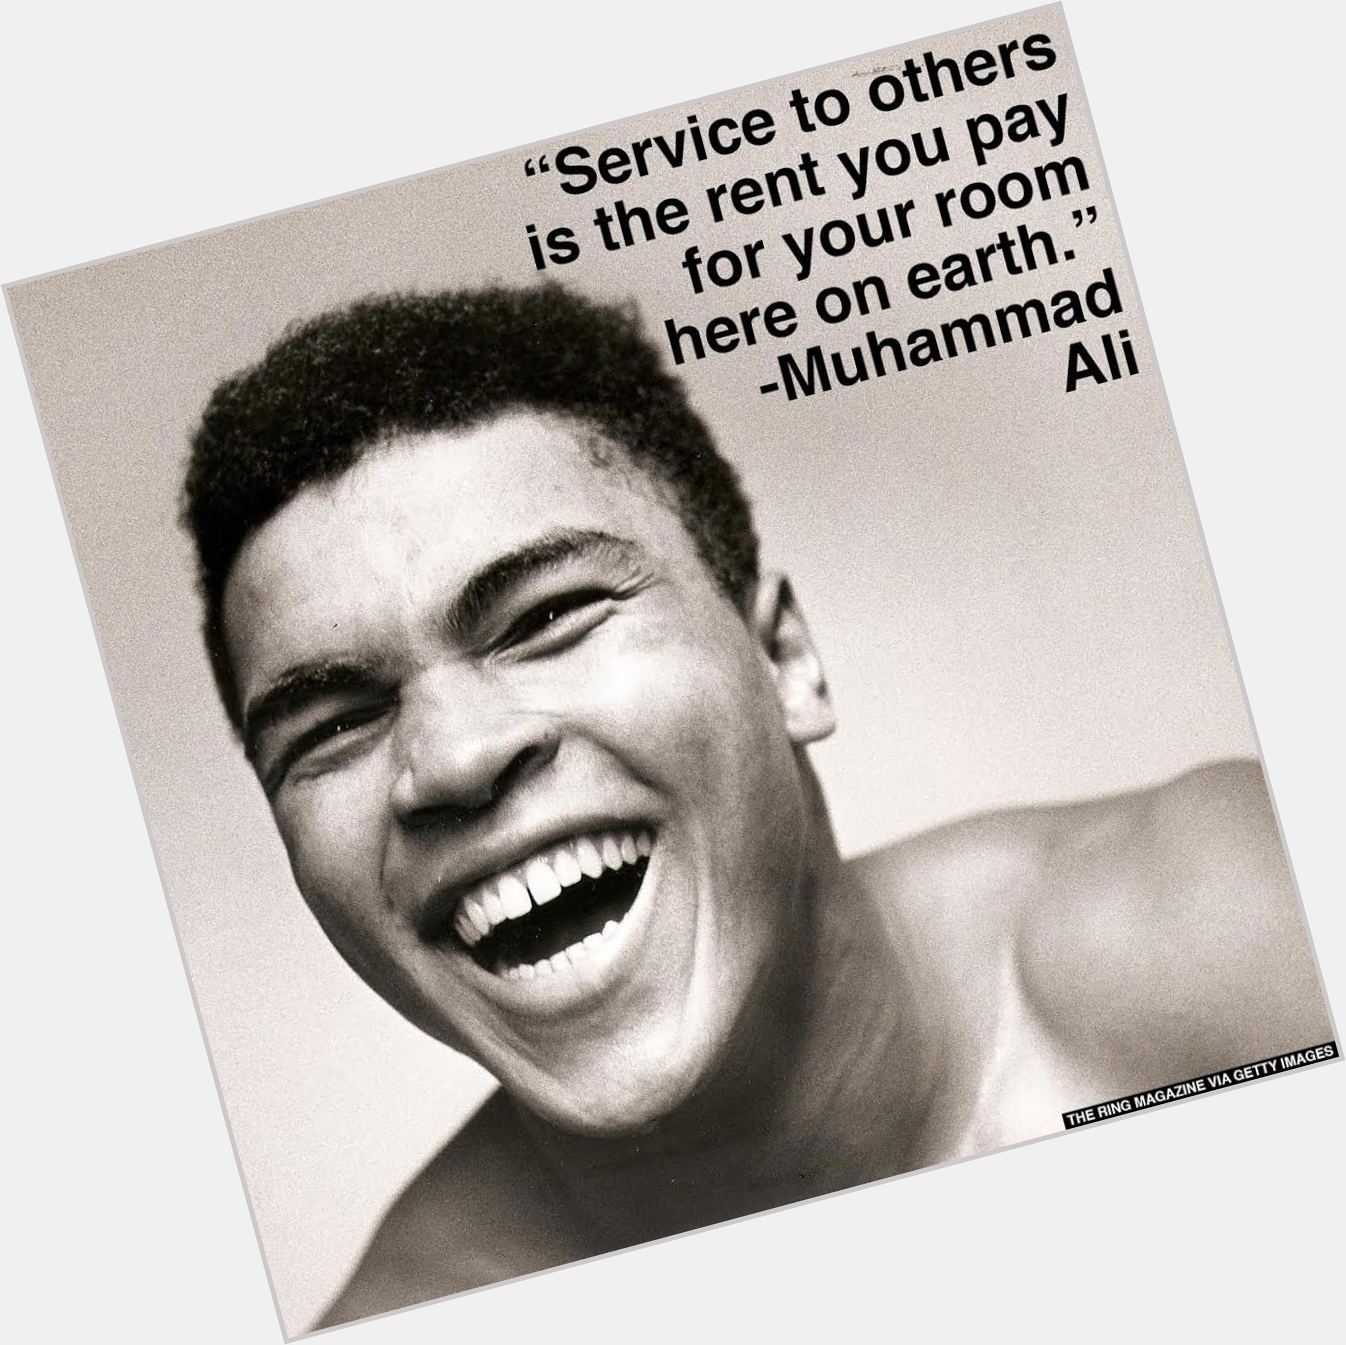 Happy birthday to Muhammad Ali, who said Service to others is the rent you pay for your room here on earth. 